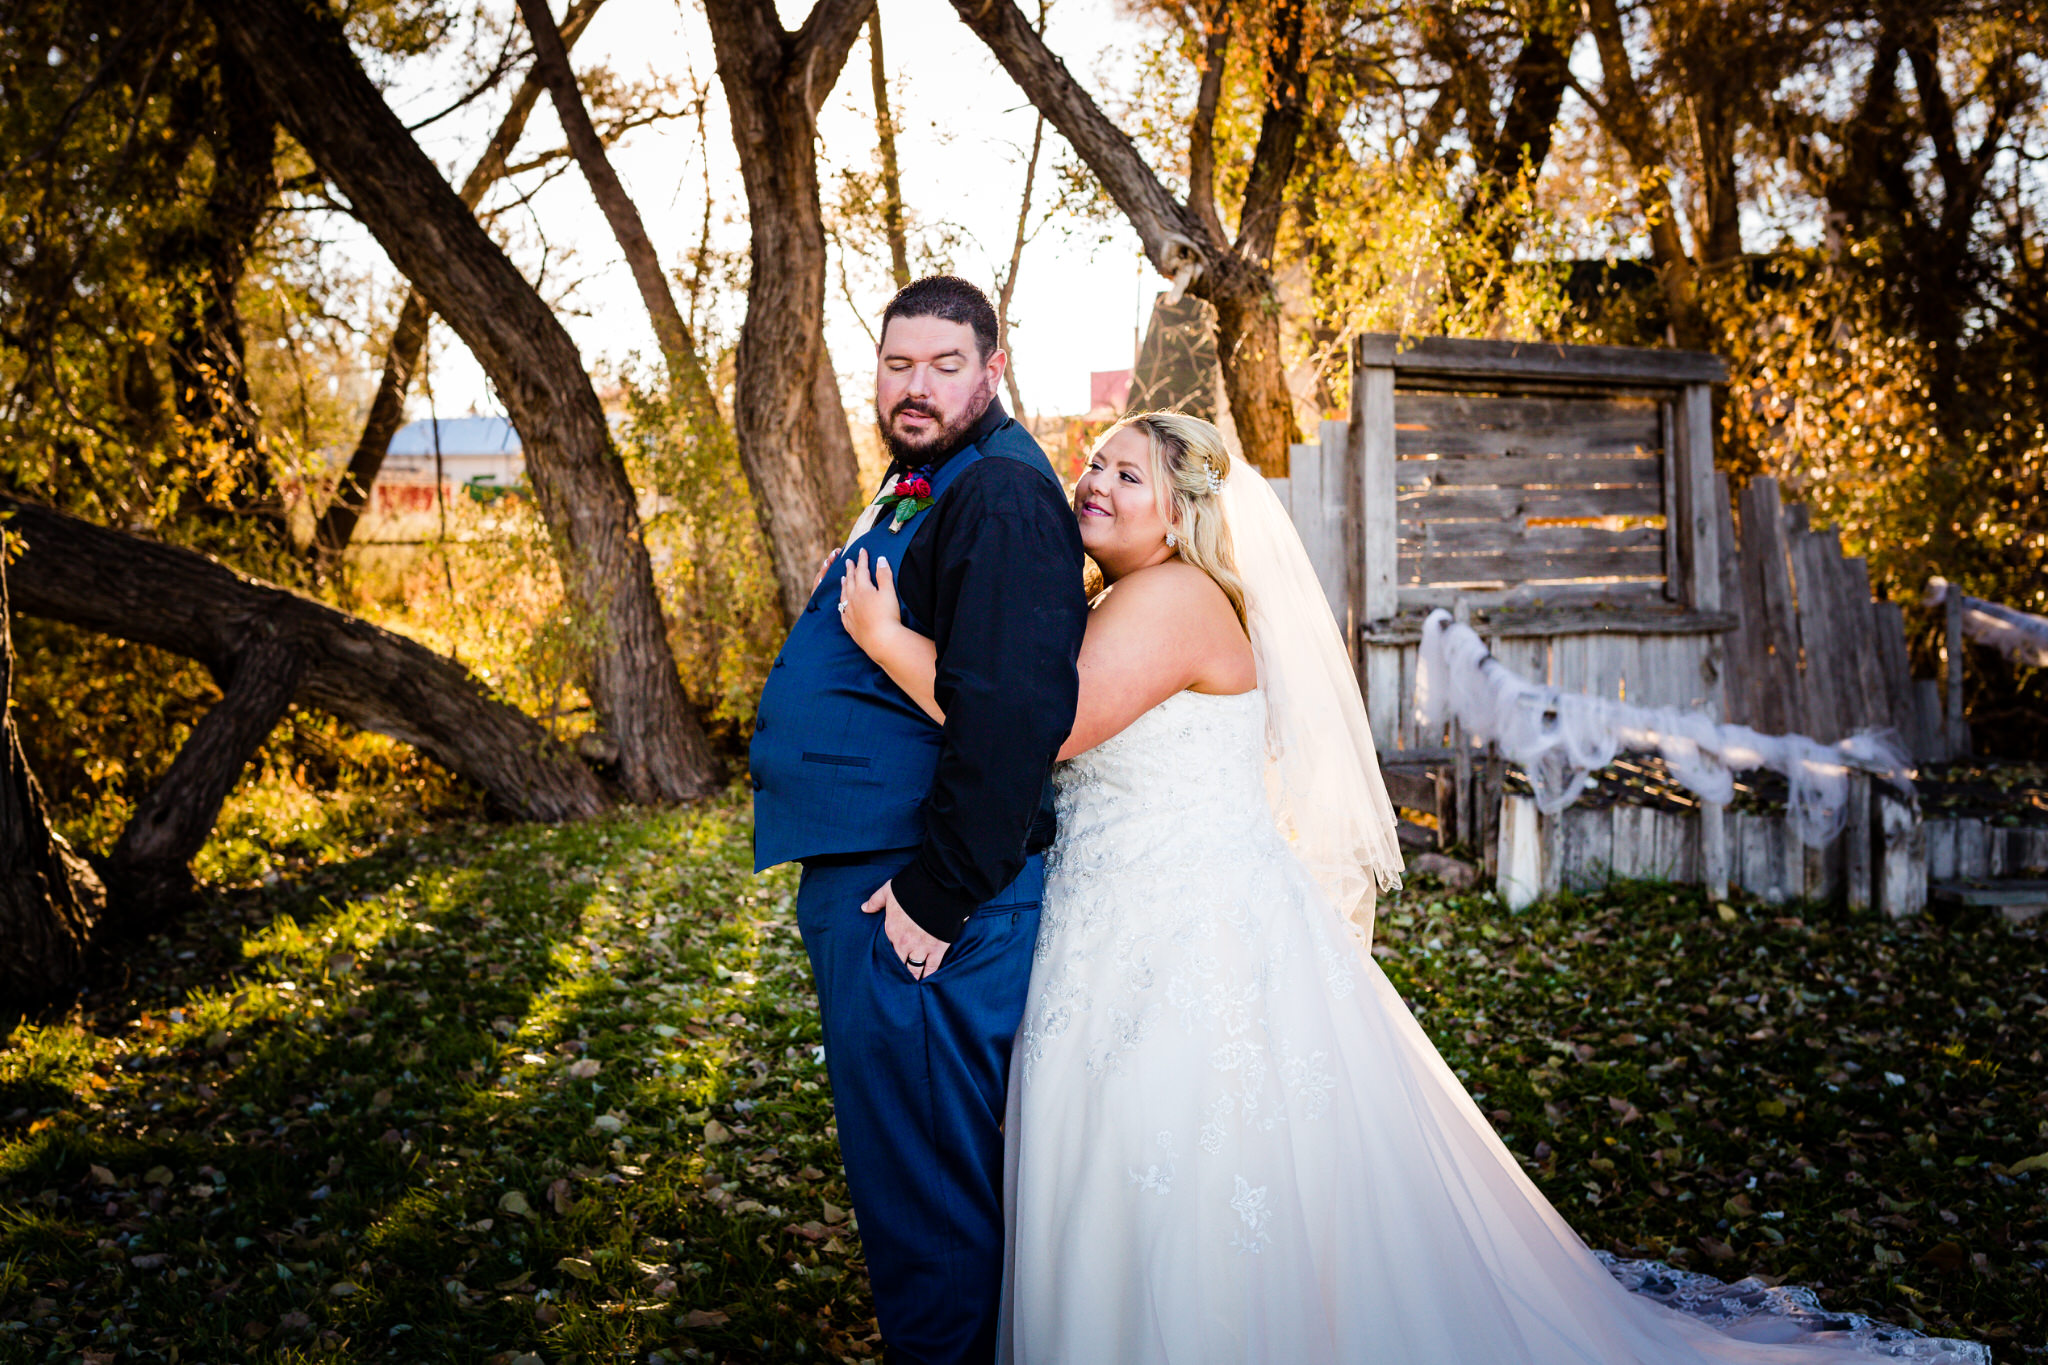 The bride hugging the groom from behind during their portrait session. Briana and Kevin's Terry Bison Ranch Wedding by Wyoming Wedding Photographer Jennifer Garza, Wyoming Wedding, Wyoming Wedding Photographer, Wyoming Engagement Photographer, Wyoming Bride, Couples Goals, Wyoming Wedding, Wedding Photographer, Wyoming Photographer, Wyoming Wedding Photography, Wedding Inspiration, Destination Wedding Photographer, Fall Wedding, Ranch Wedding, Rustic Wedding Inspiration, Wedding Dress Inspo